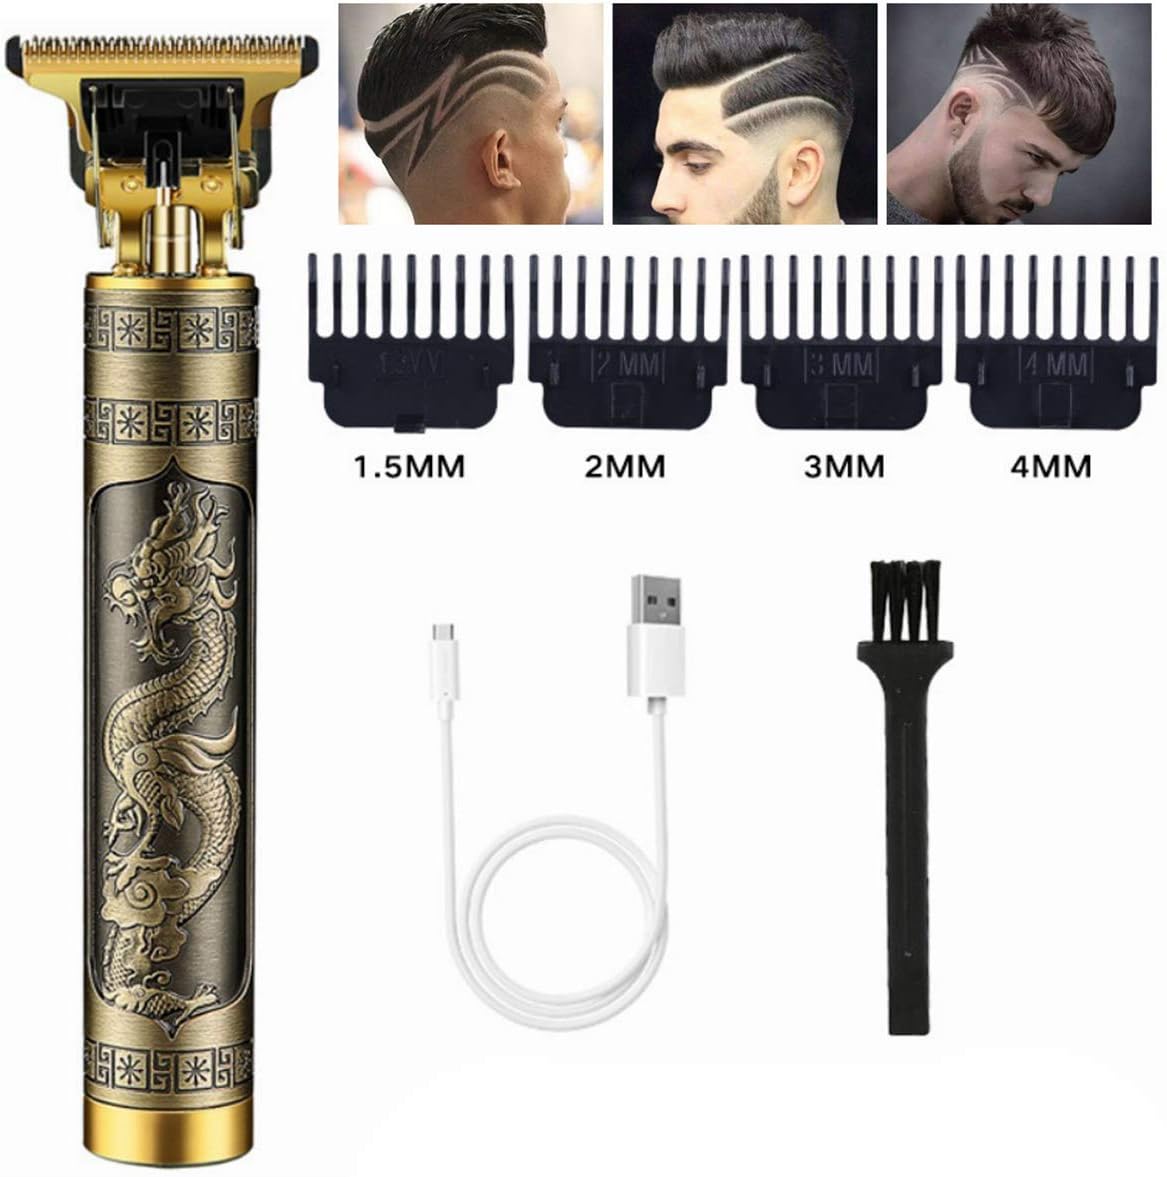 L LARHU Professional Men Hair Trimmers, Zero Gapped Cordless Hair Trimmer, Rechargeable T-Blade Haircut & Grooming Kit Line Up Edgers Clippers for Men Home Use (A)